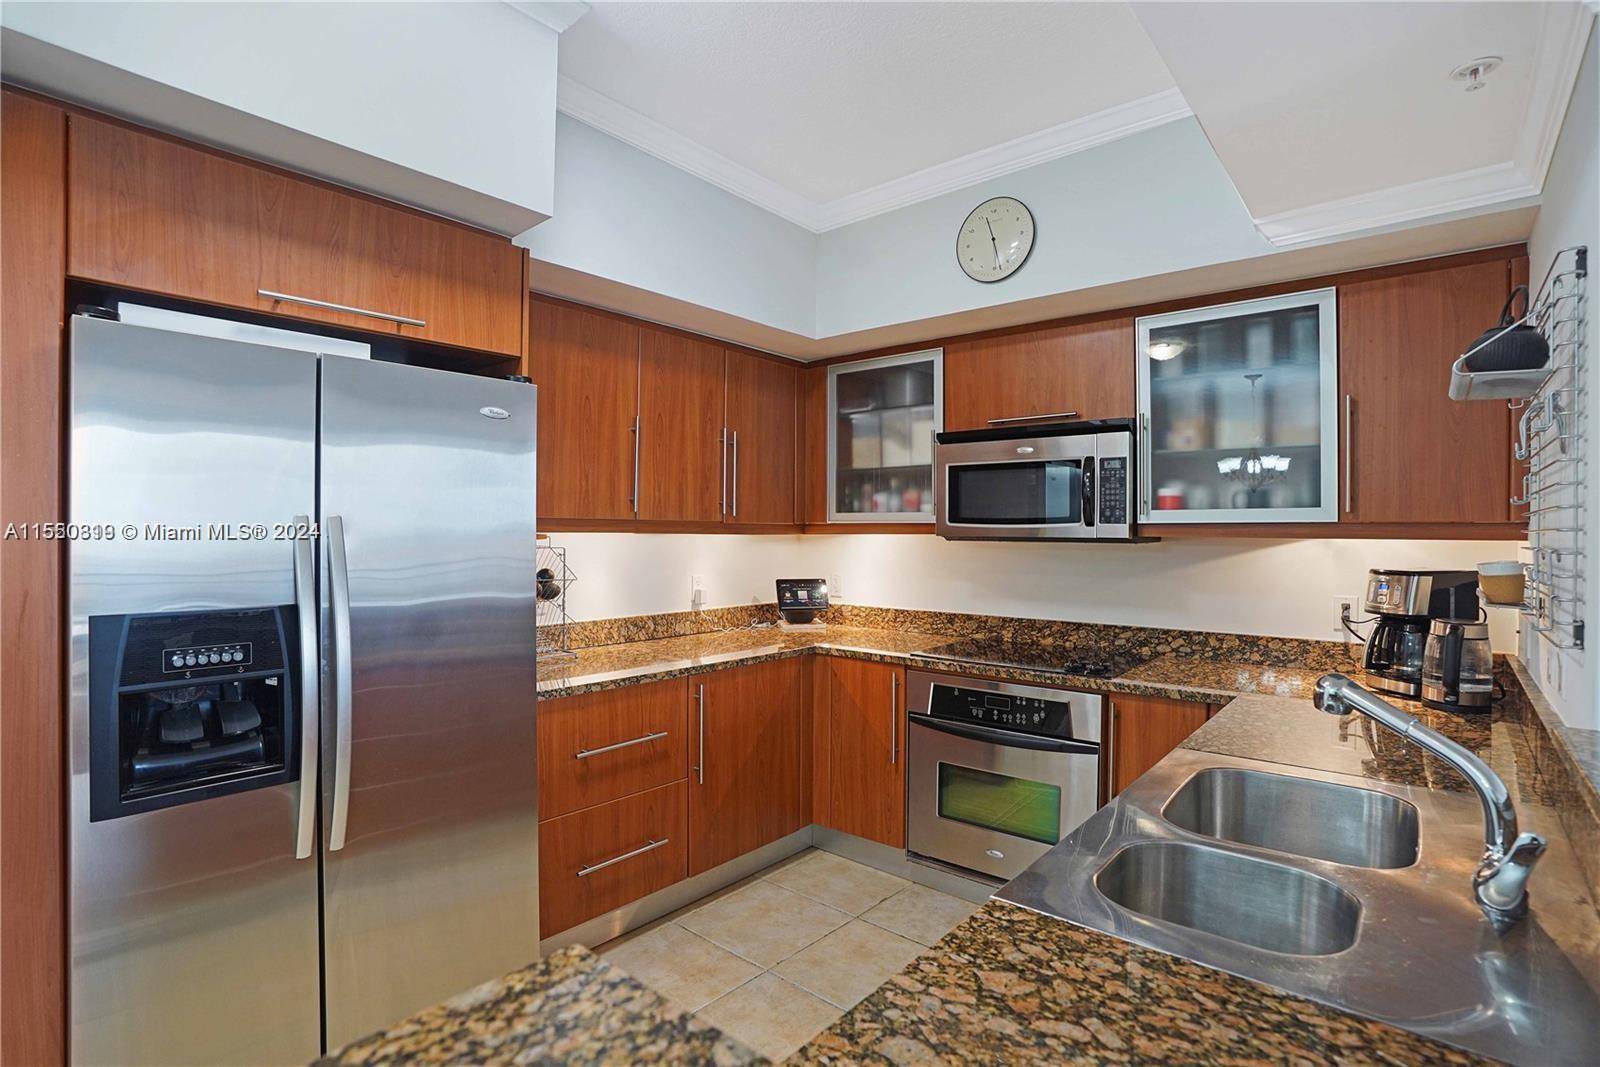 Move in ready 2 bedroom, 2 bath condo located in a full service building in the heart of Coral Gables.